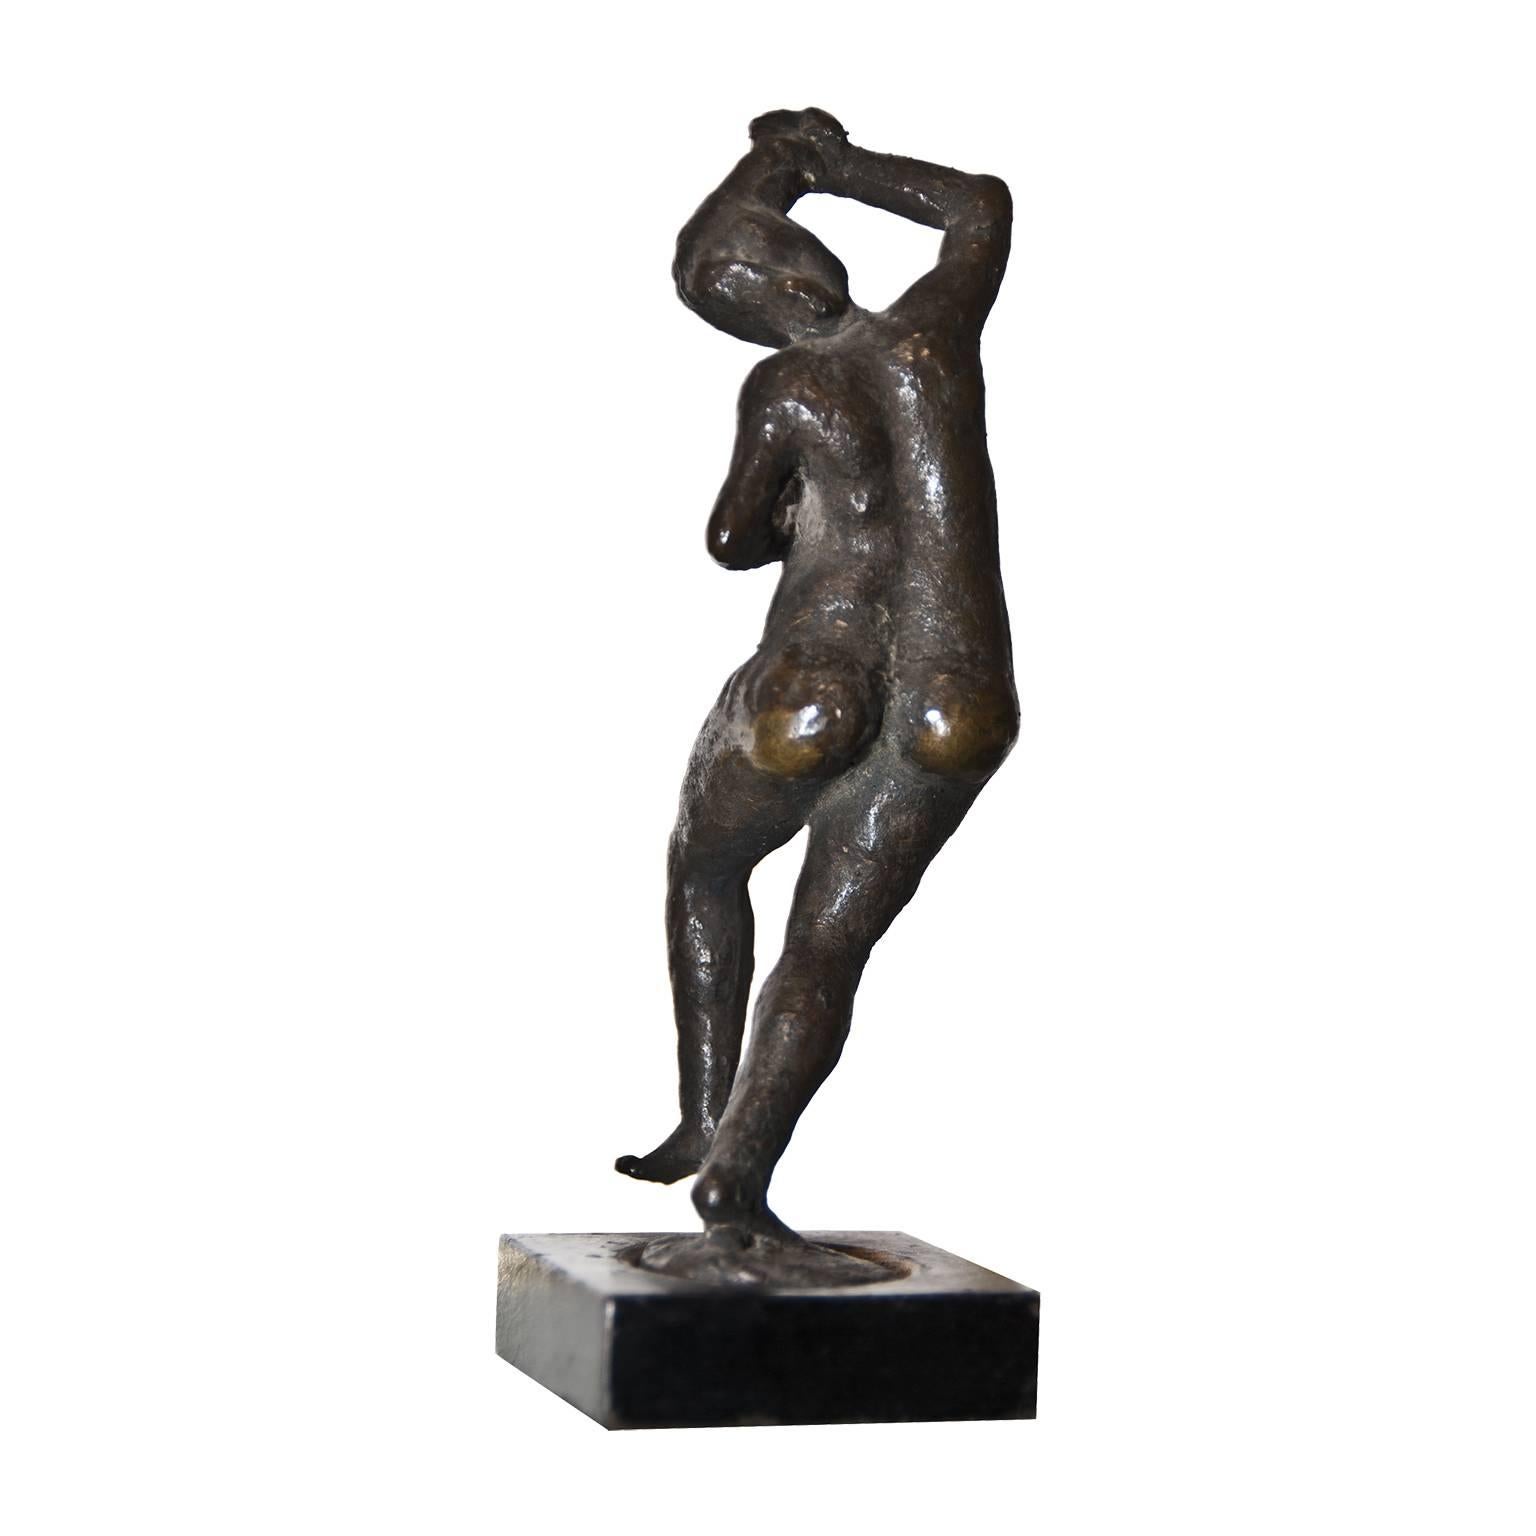 Passo di Danza is a bronze sculpture representing a dancer with wooden base. Signed and dated under the base. Certificate of authenticity signed by the artist. 

Giuseppe Mazzullo was an Italian artist and sculptor. After graduating from the